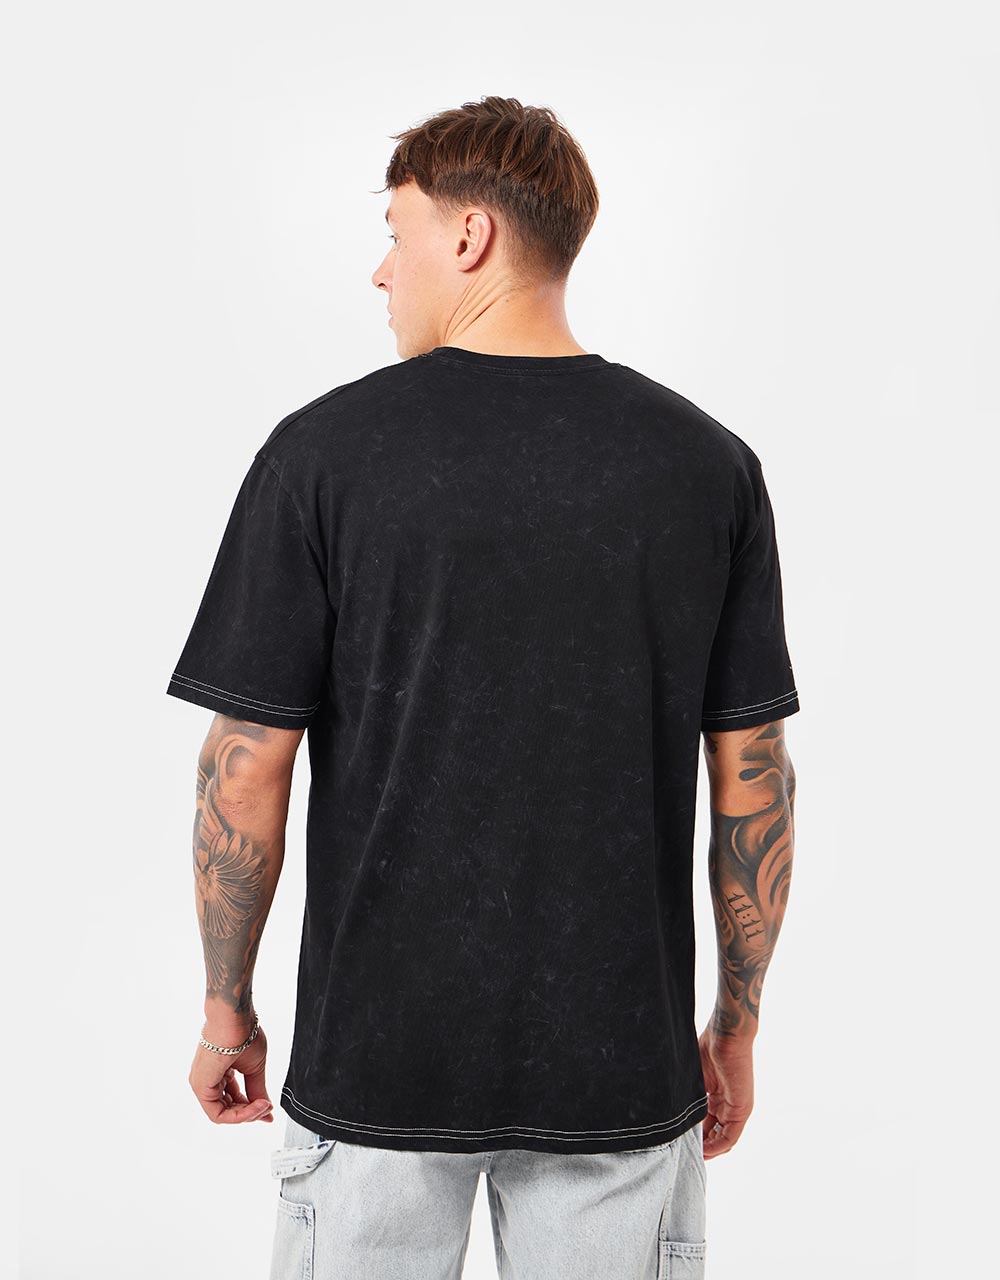 Route One Organic Constrast Stitch T-Shirt - Black